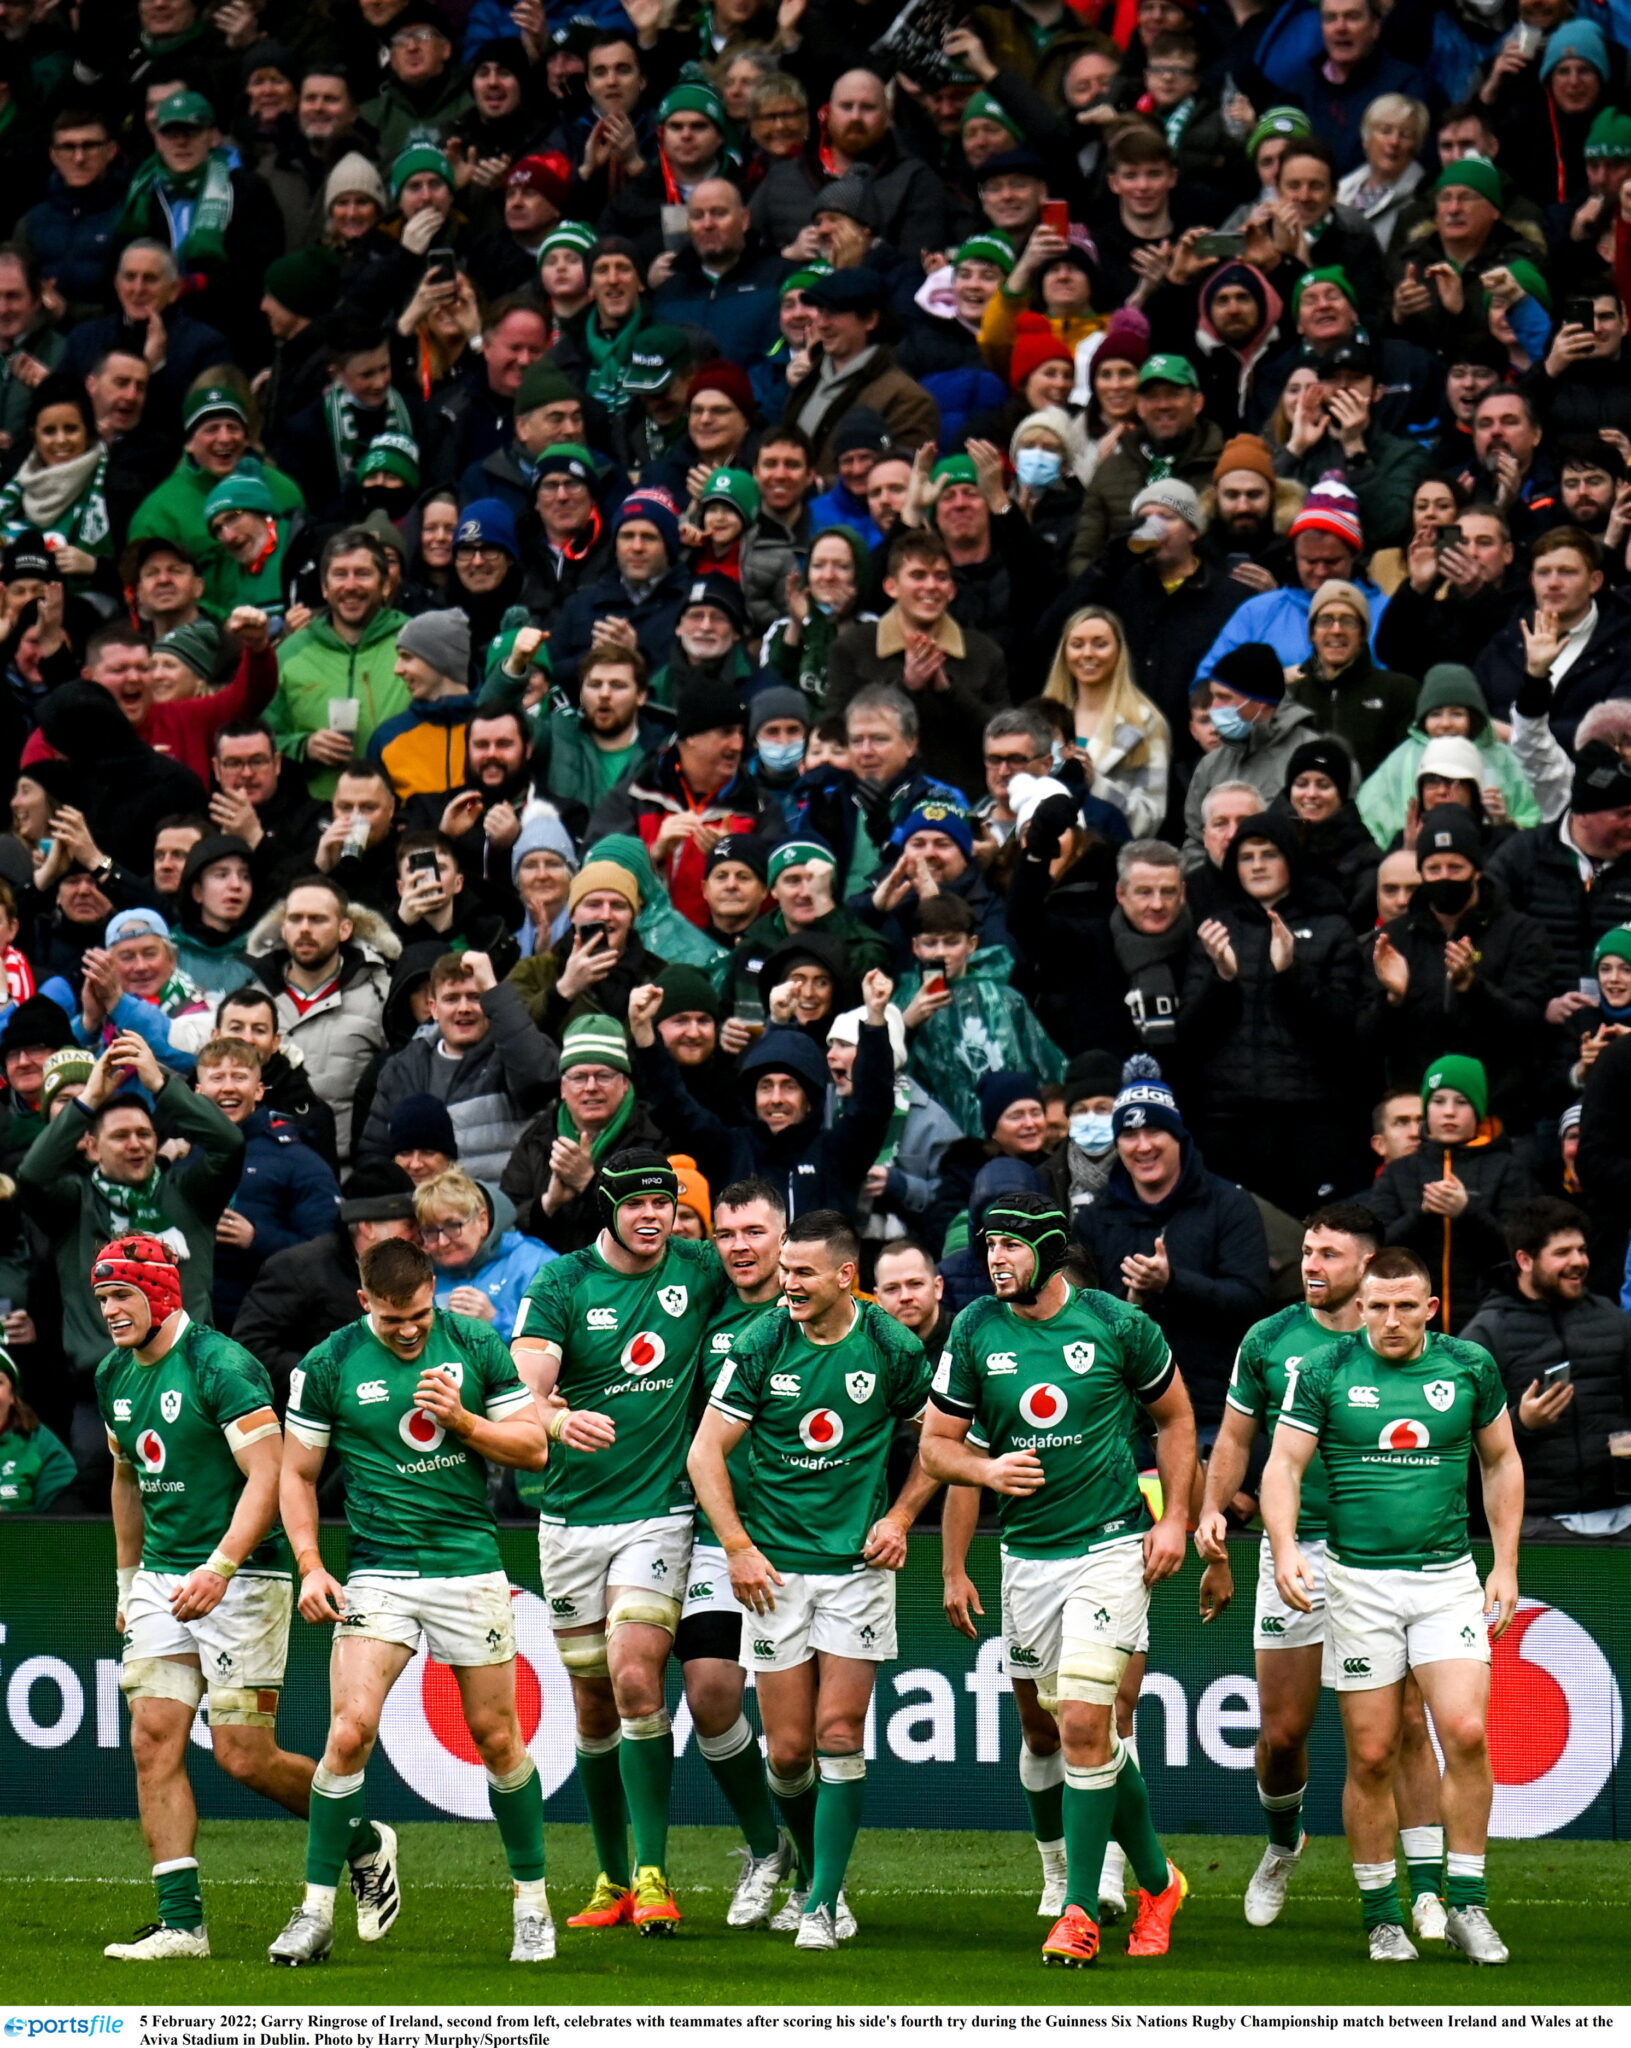 | Ireland off to a flying start with win Six Nations opener